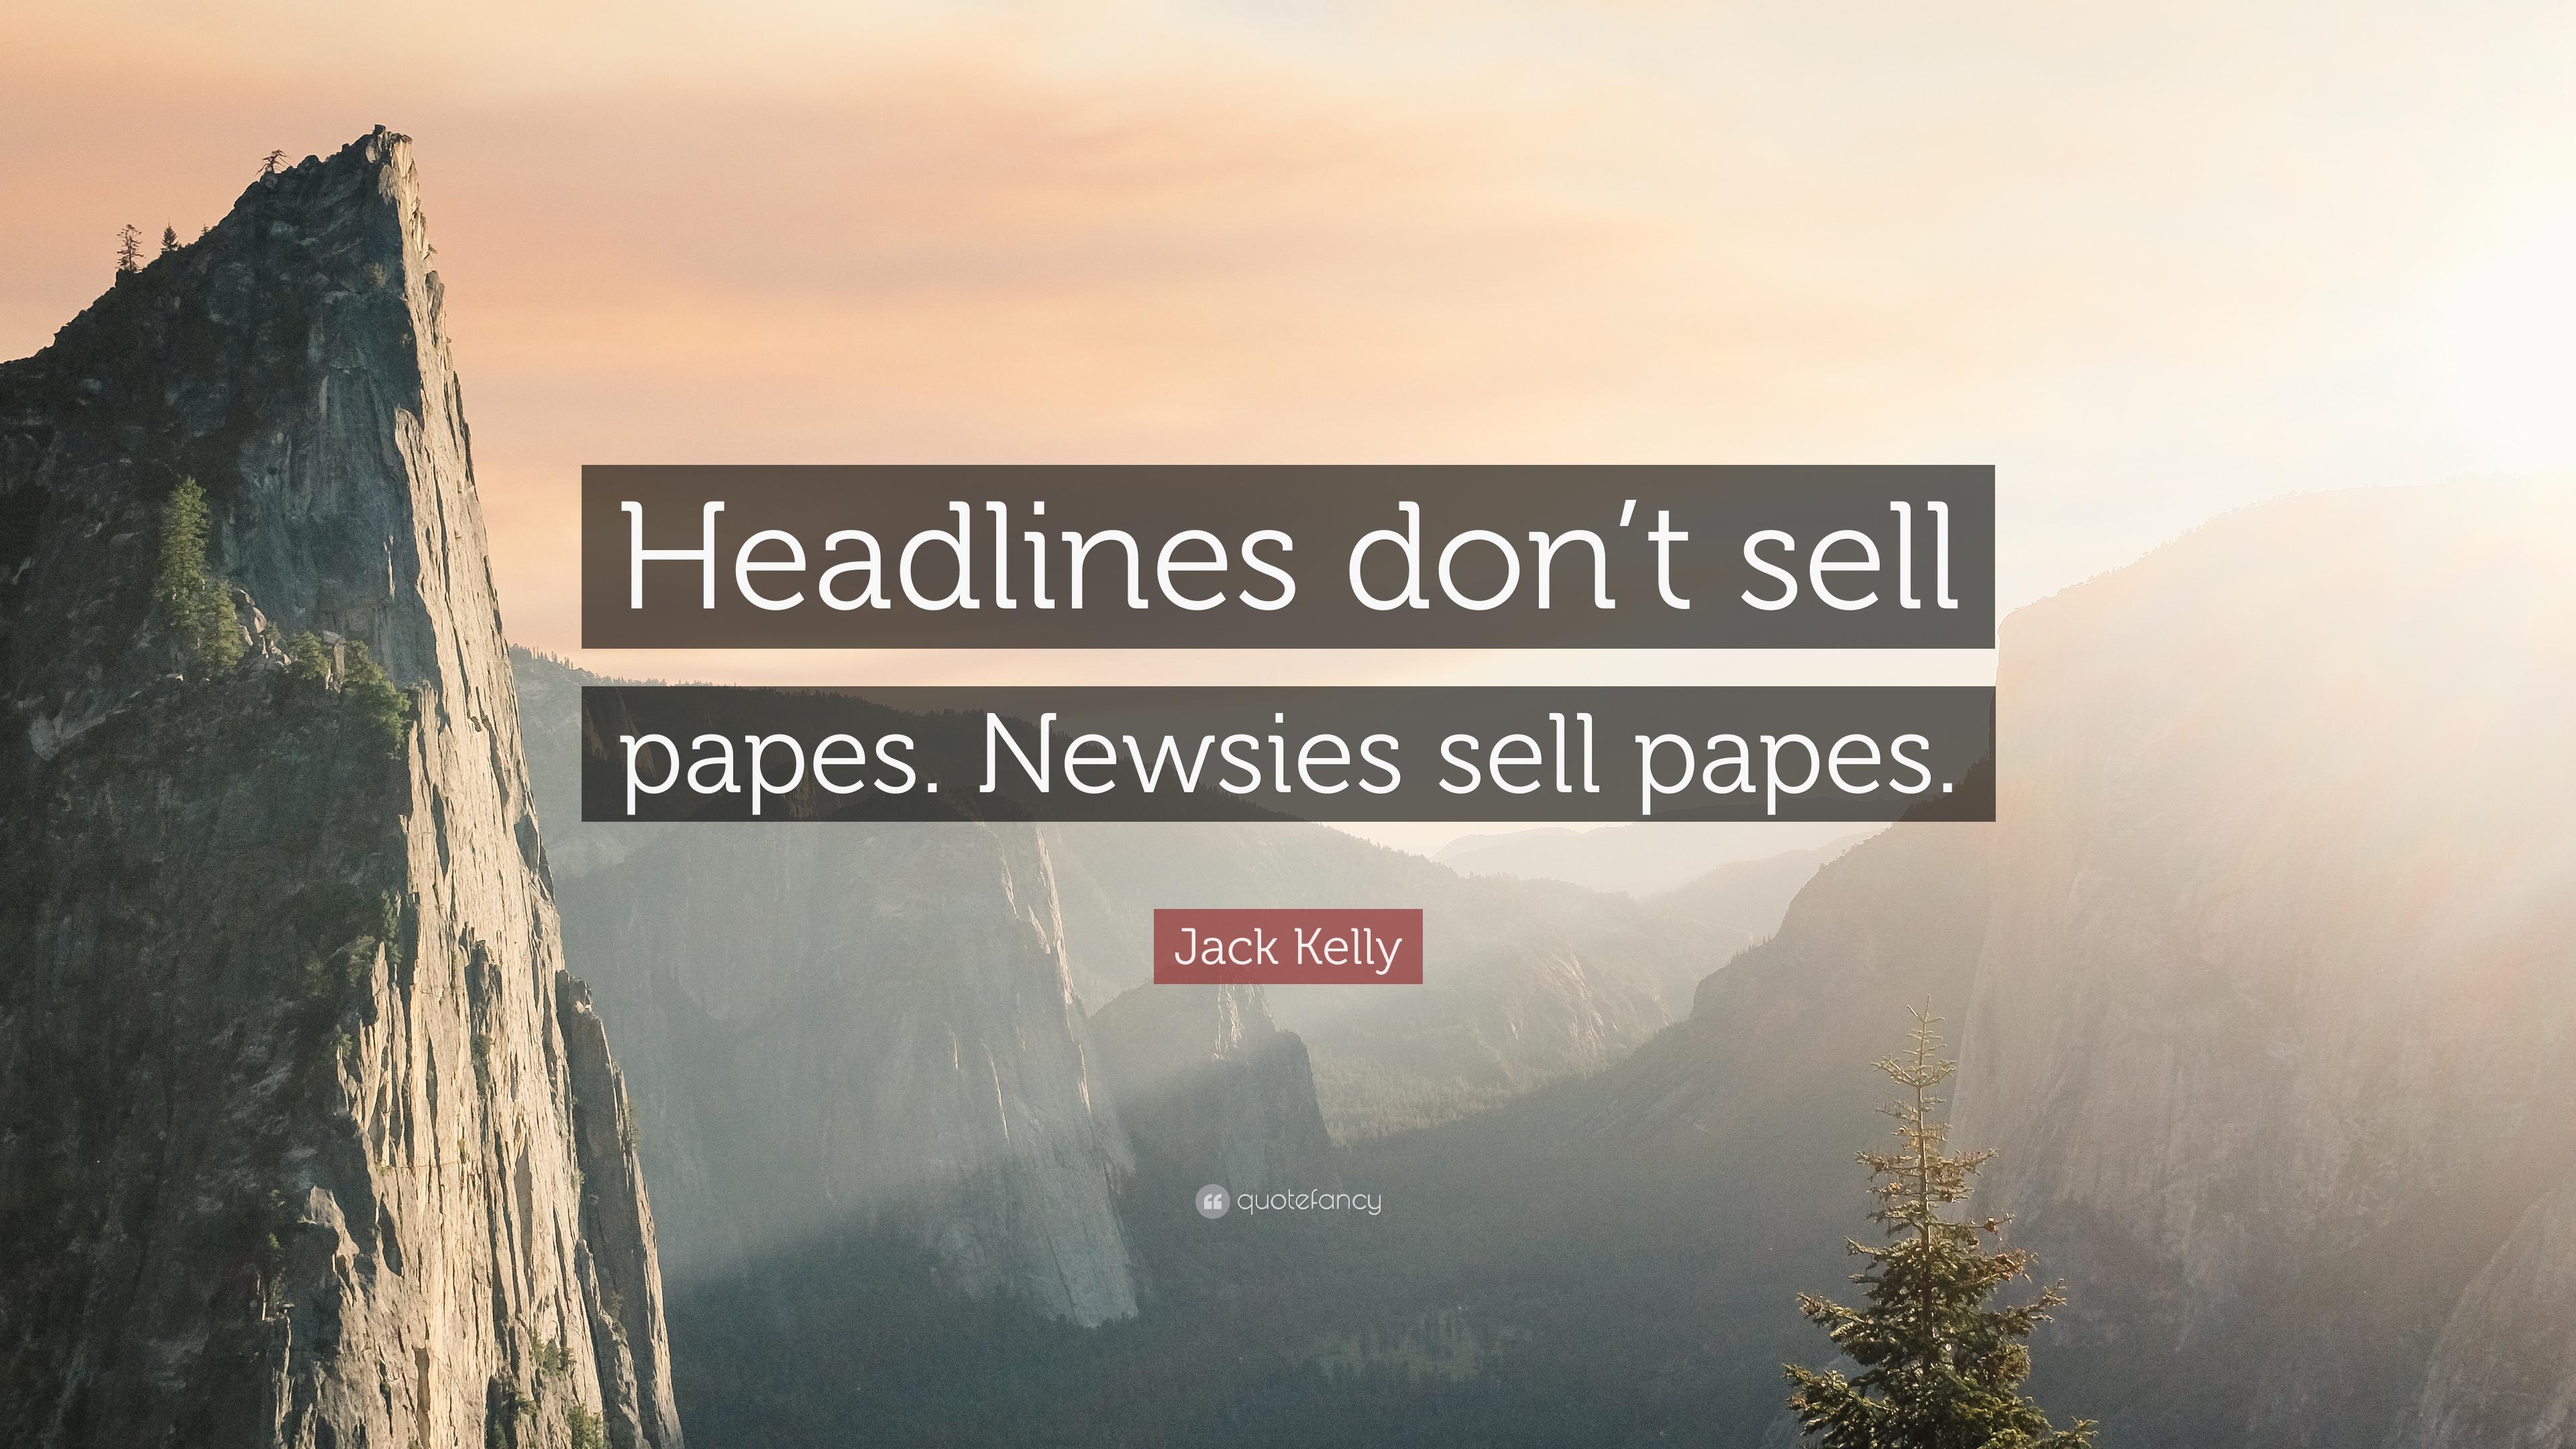 Jack Kelly Quote: “Headlines don't sell papes. Newsies sell papes